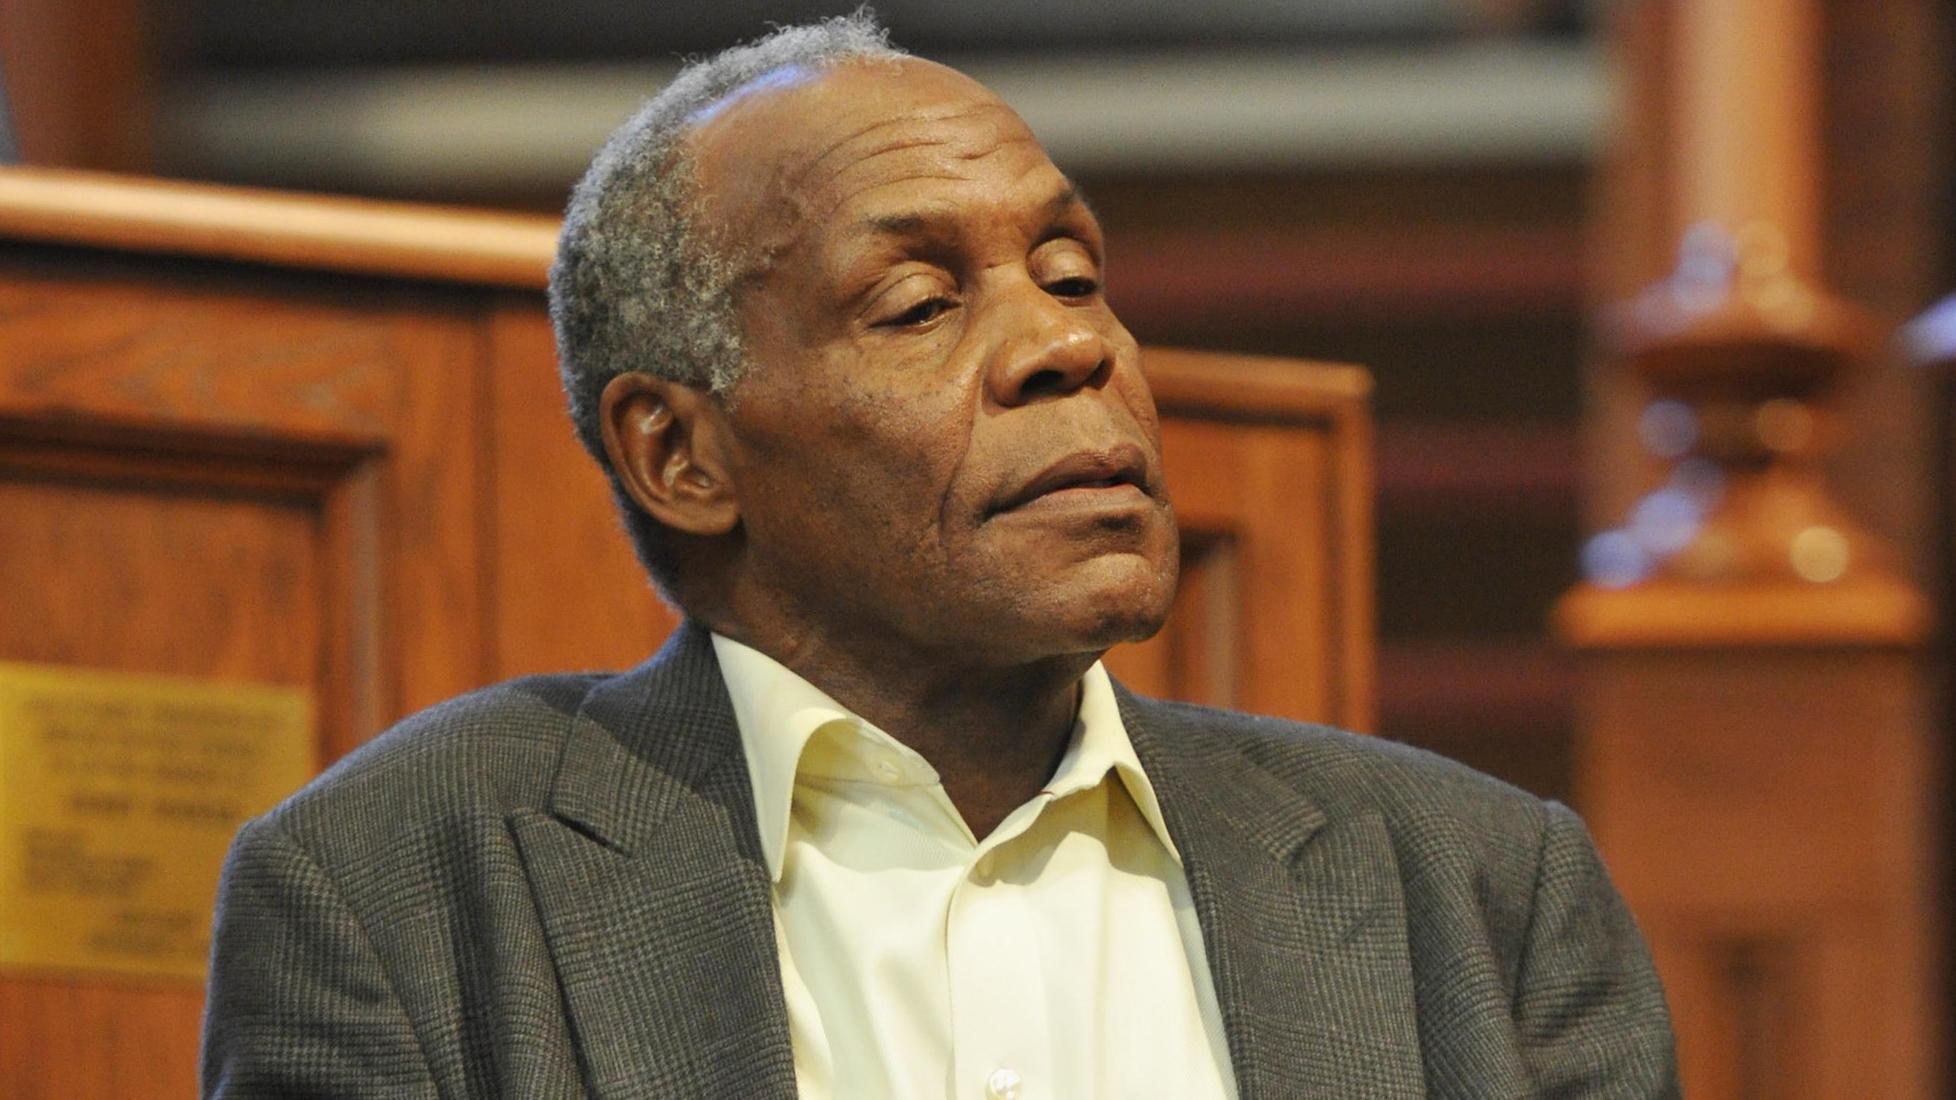 All Danny Glover wallpapers.